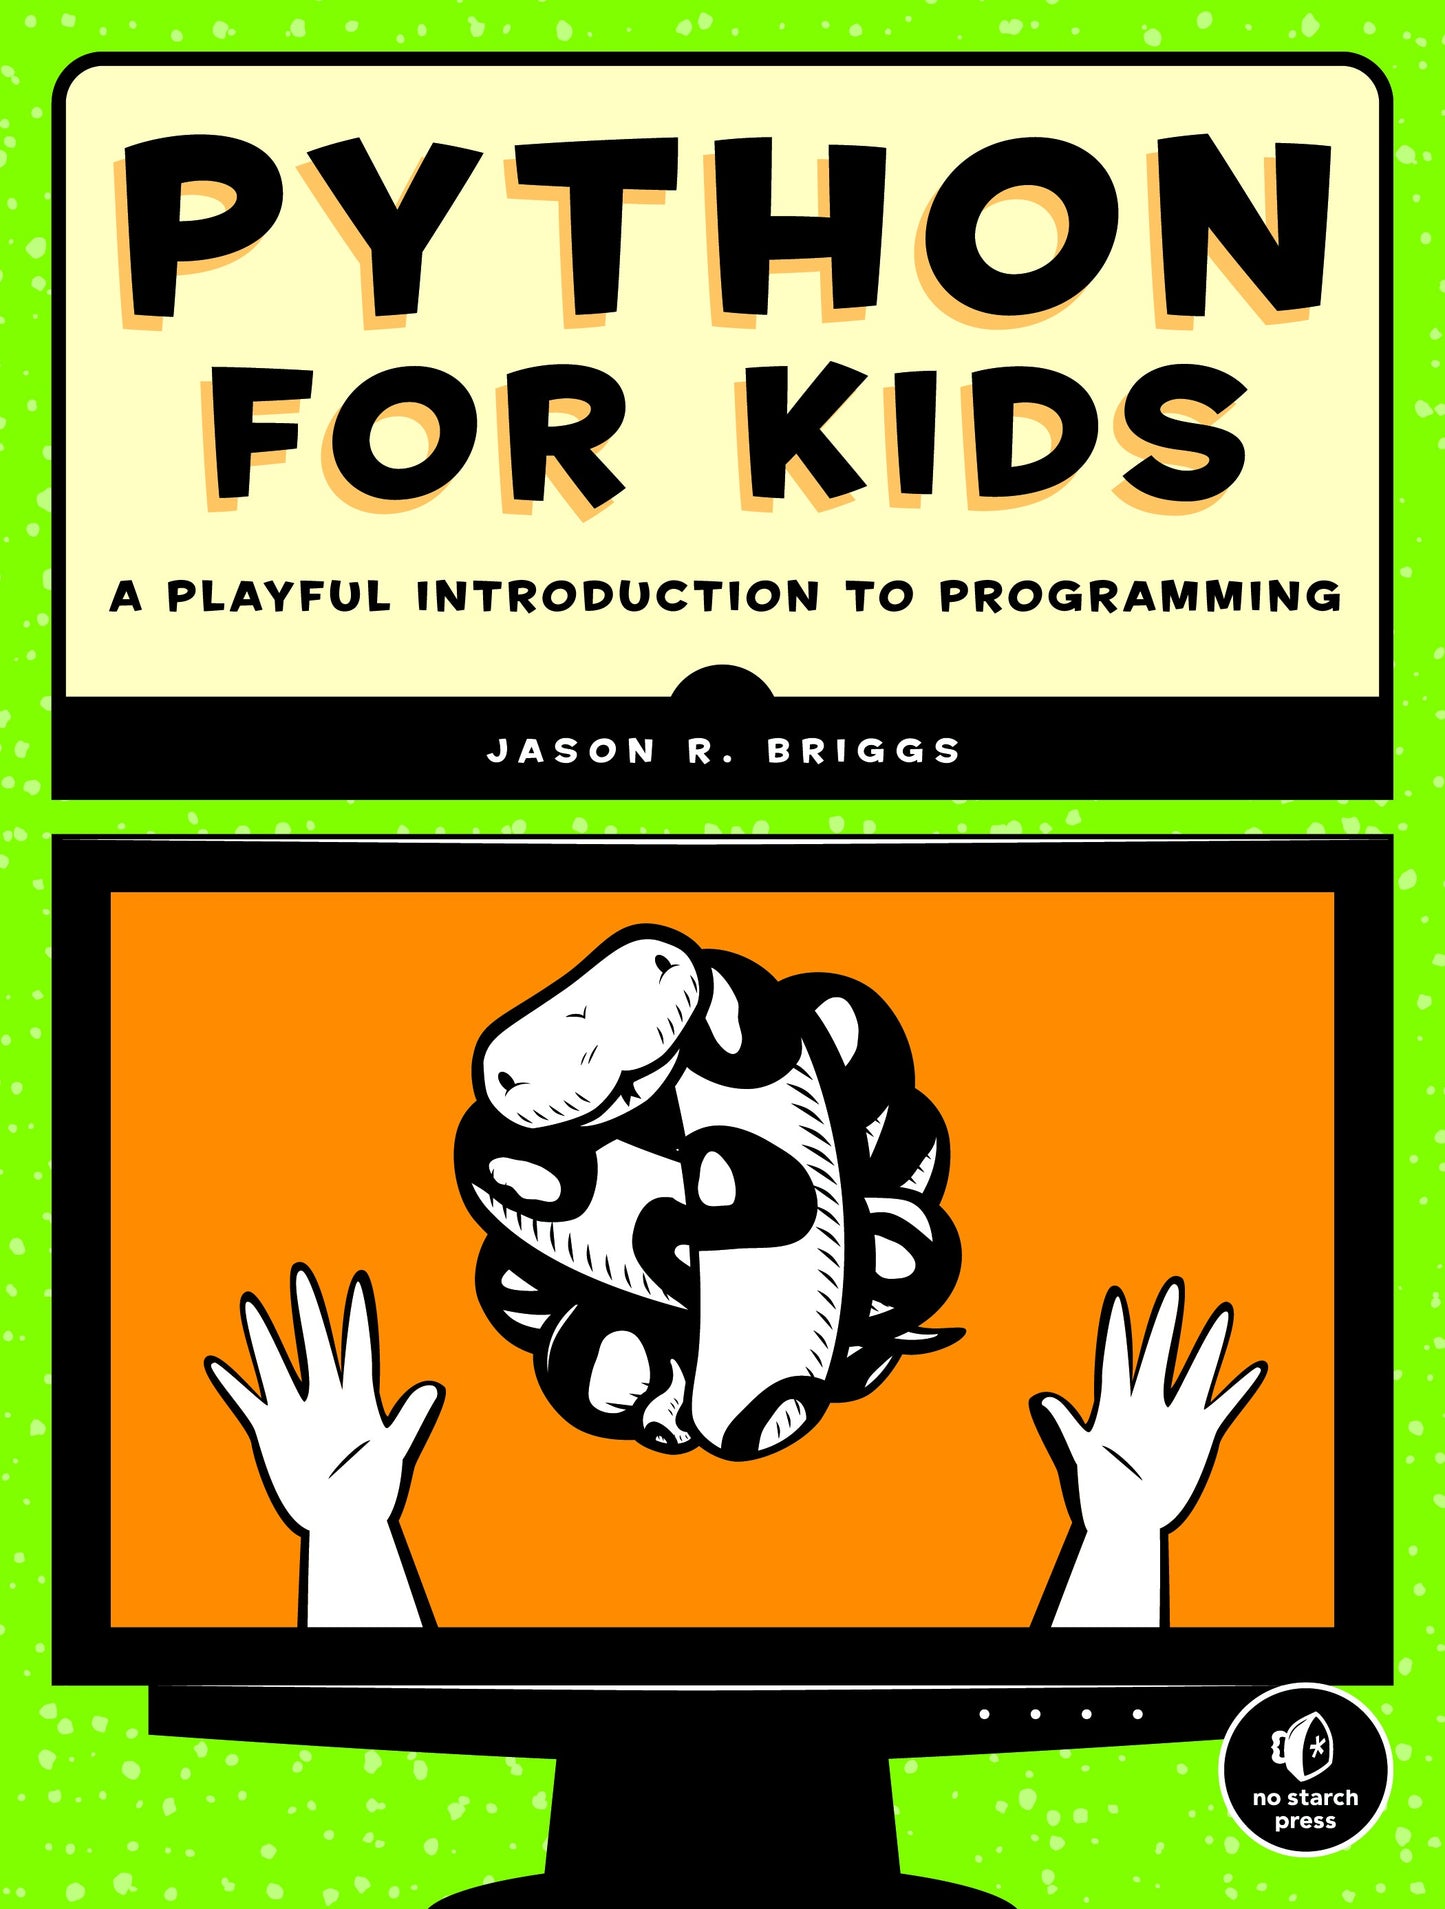 Python programming, coding for kids, interactive learning, hands-on projects, cross-platform compatibility, Python for education, and engaging programming curriculum, Digital Technology Book, Digital Technology Resource, Computer Science Book, Electronics Book 